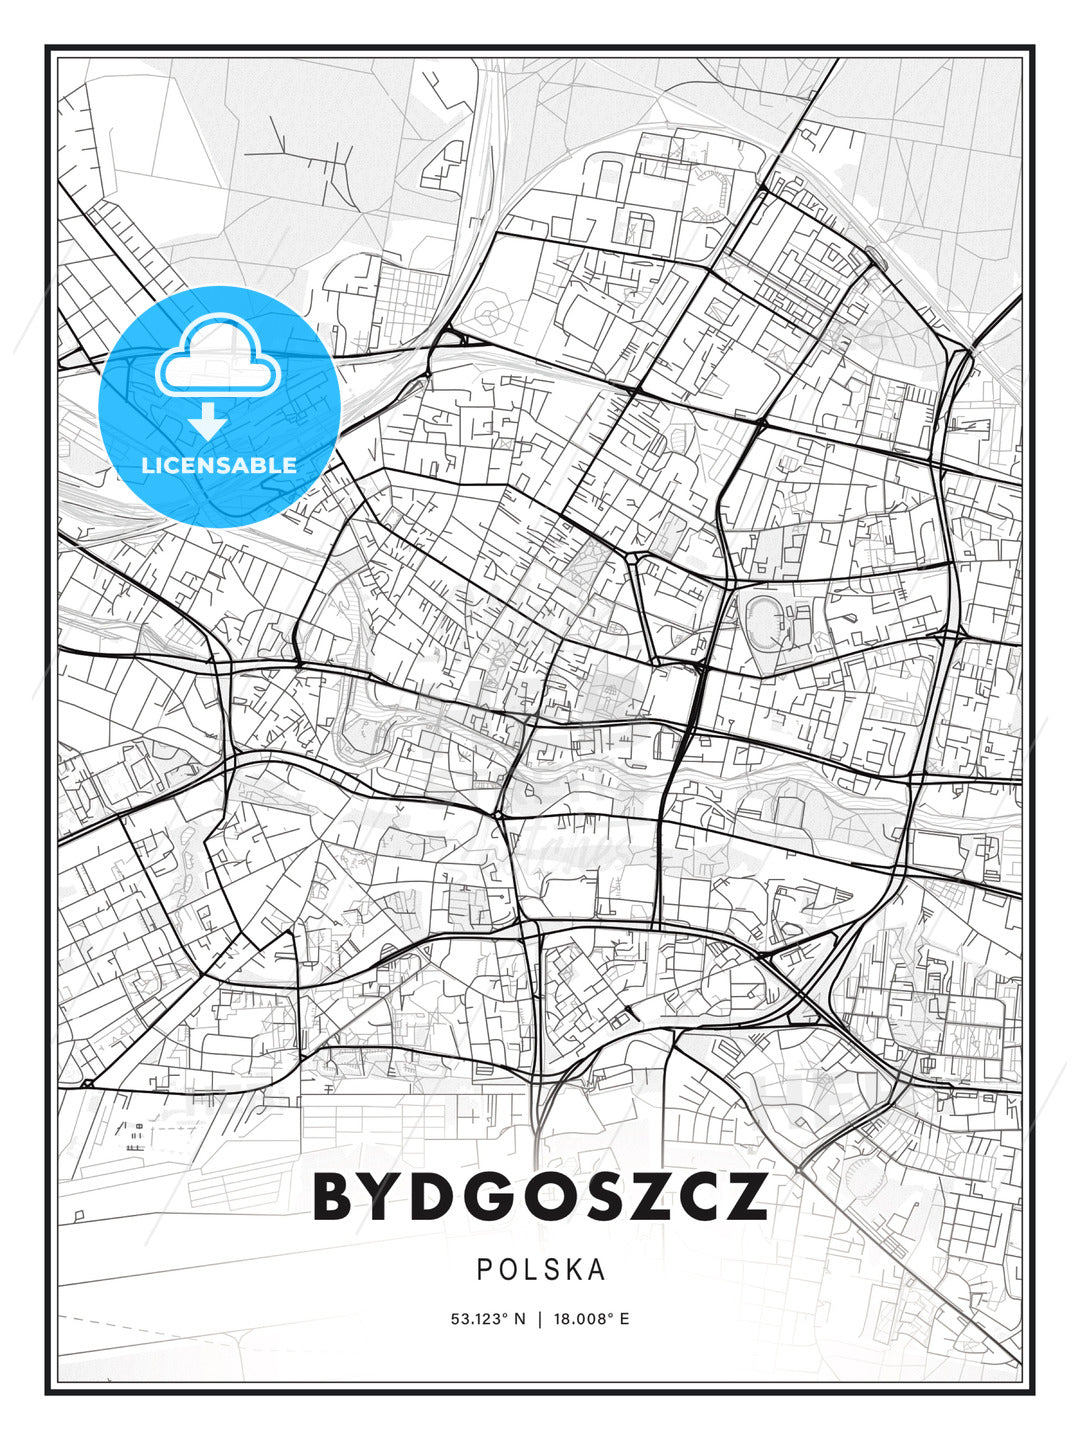 Bydgoszcz, Poland, Modern Print Template in Various Formats - HEBSTREITS Sketches